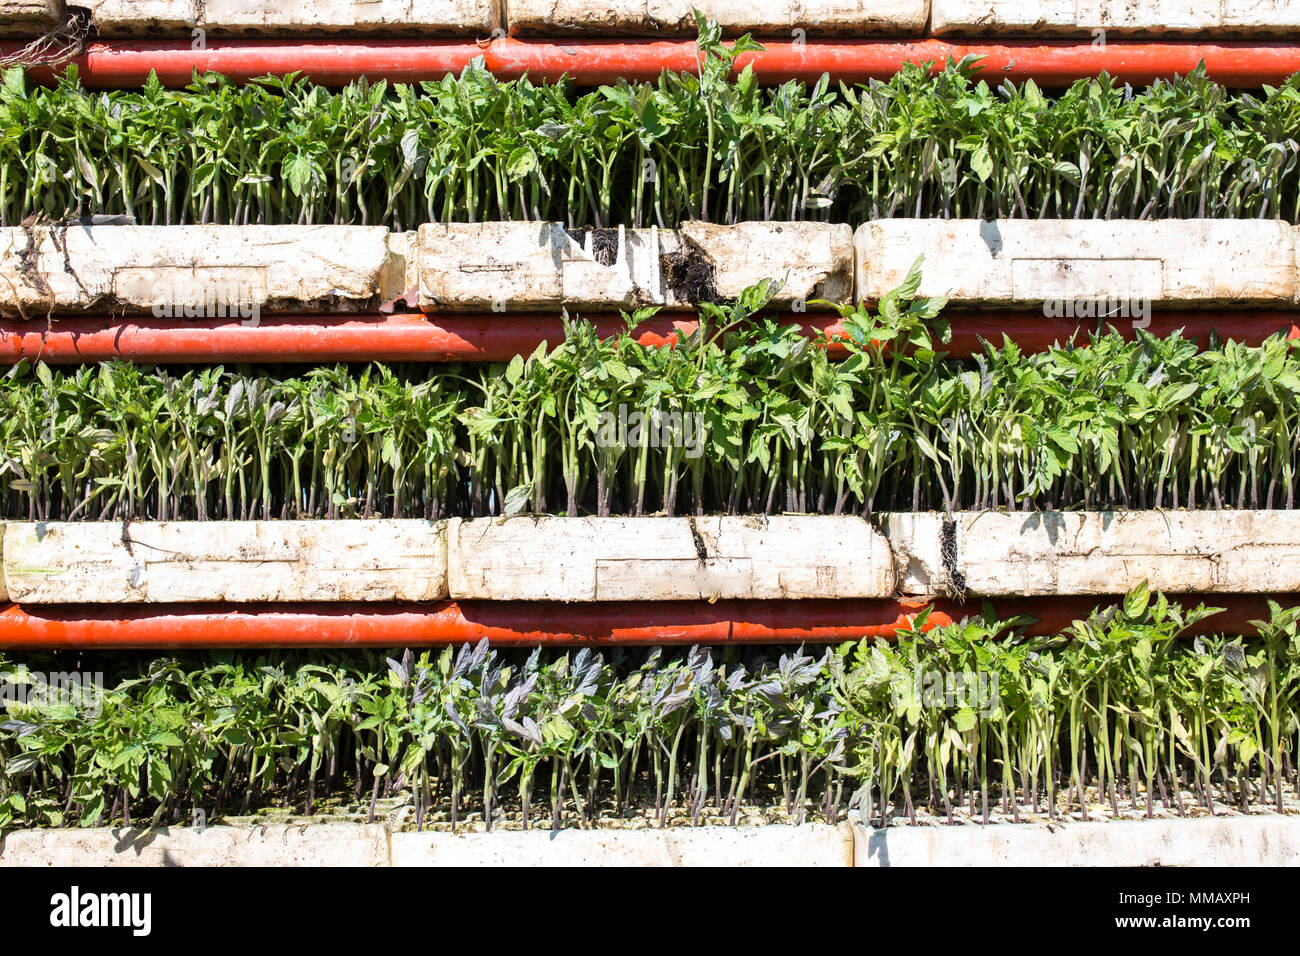 Transplanter machine loaded with tomato seedlings trays on racks. Tomato planting process from greenhouse to farmland Stock Photo